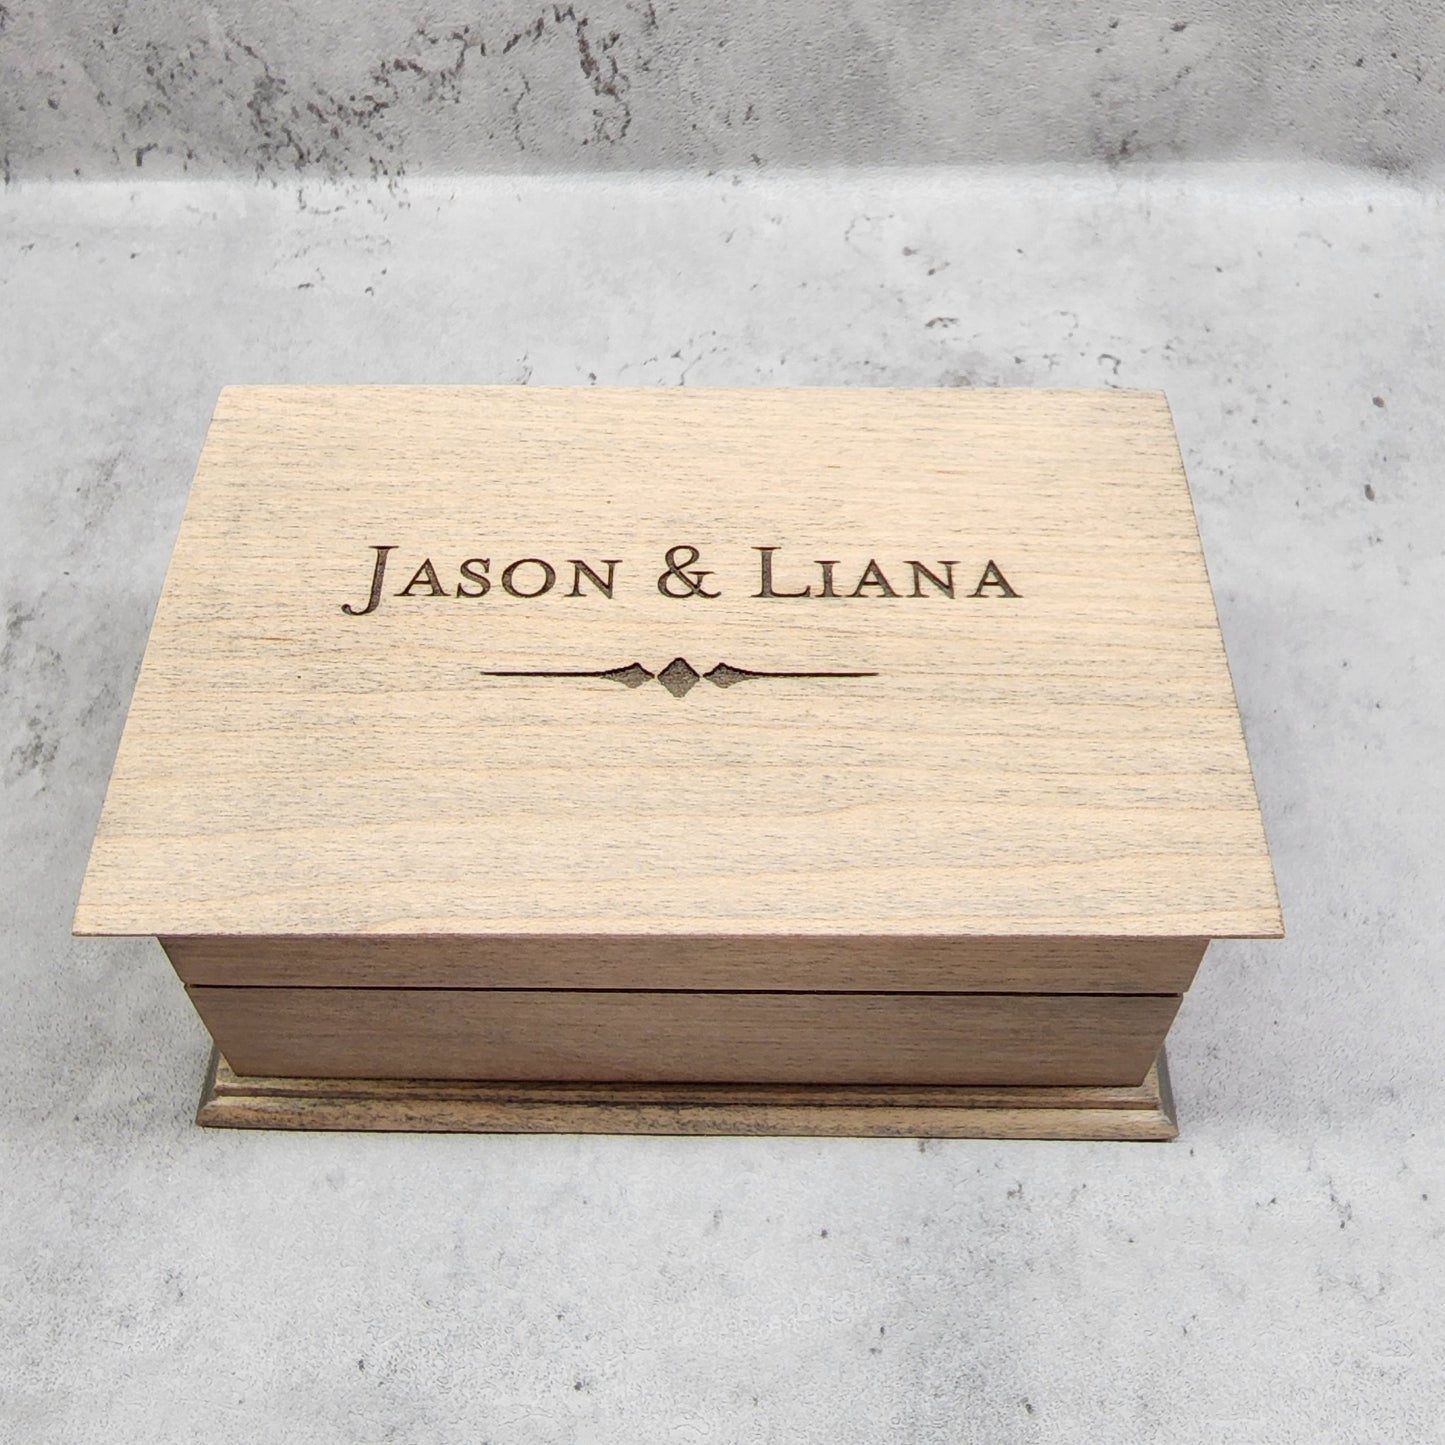 Anniversary Keepsake Box with names engraved on top, choose color and song